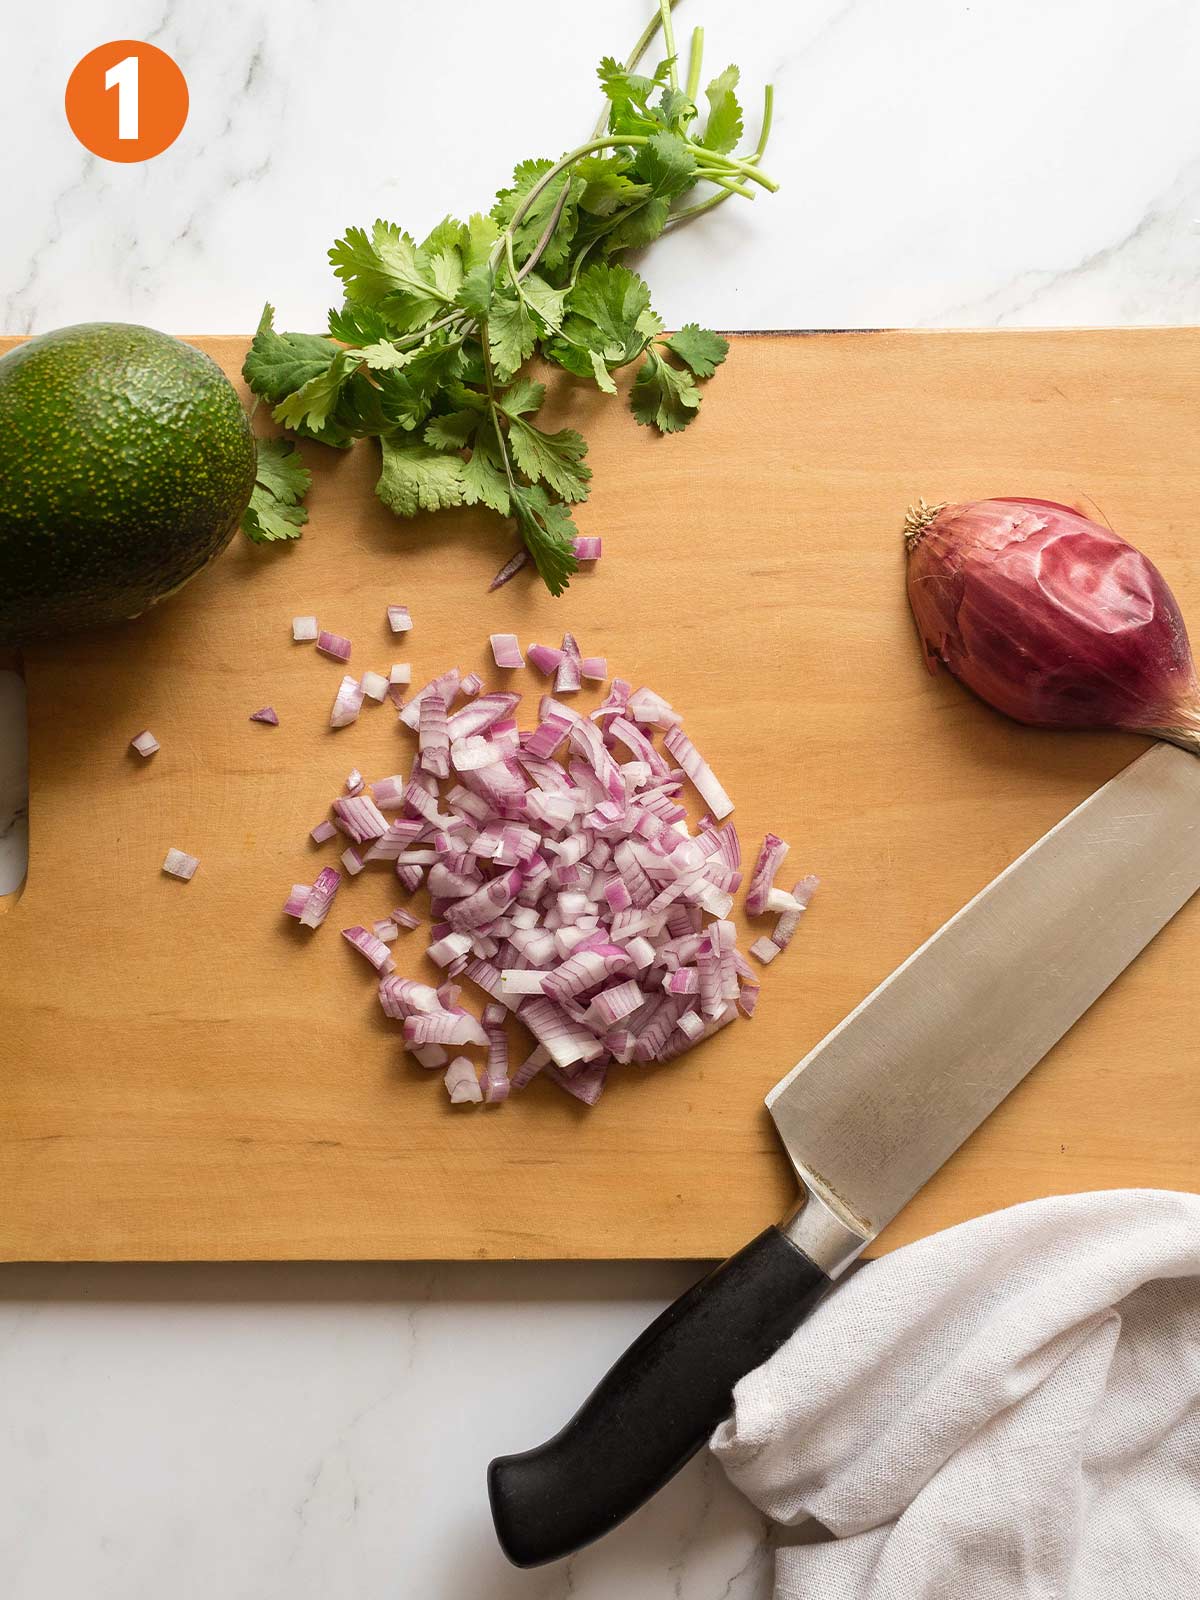 Diced onion on a cutting board to make 4-ingredient guacamole.